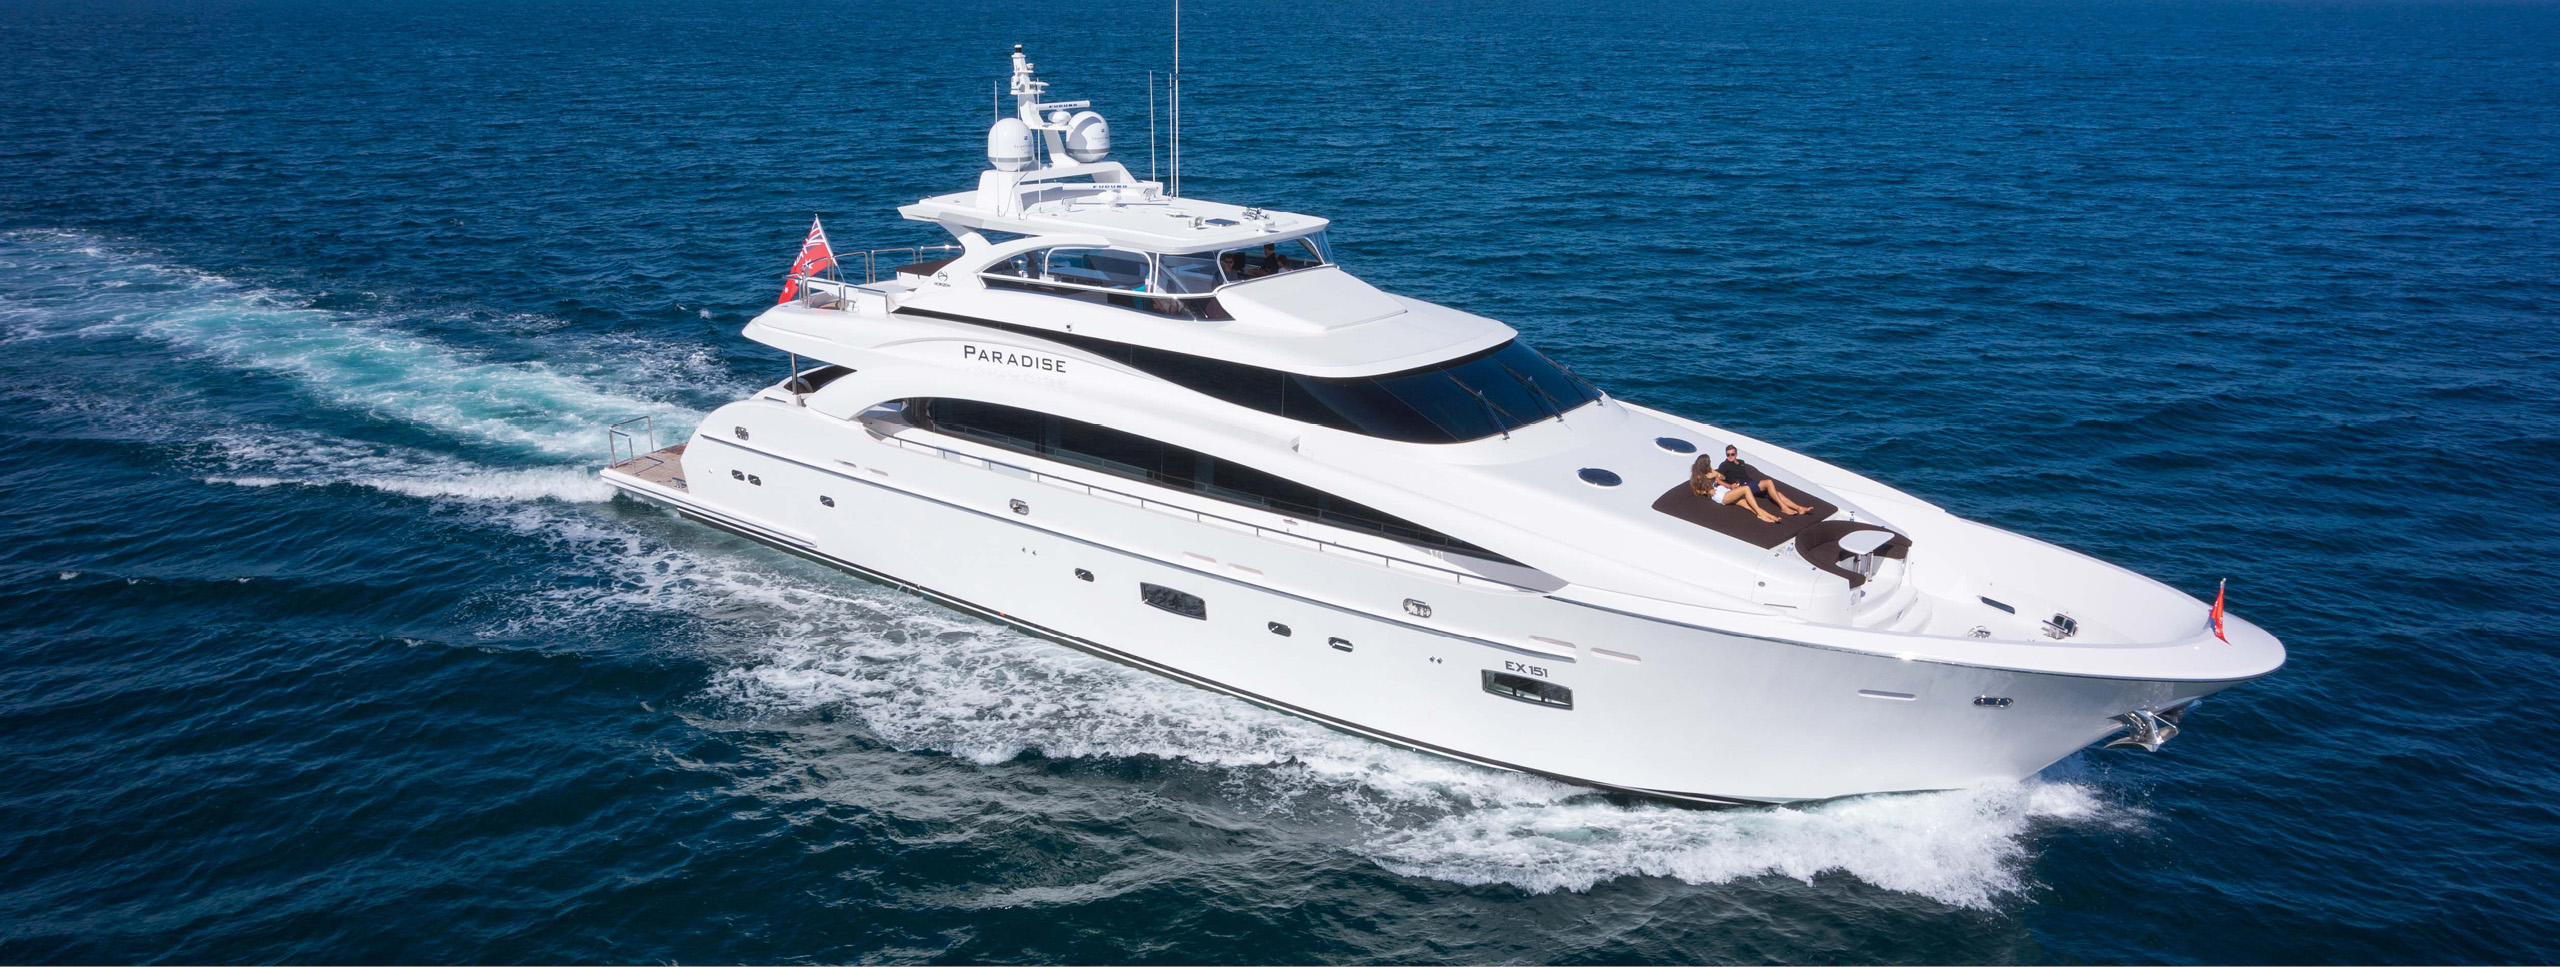 cheap yachts for sale perth